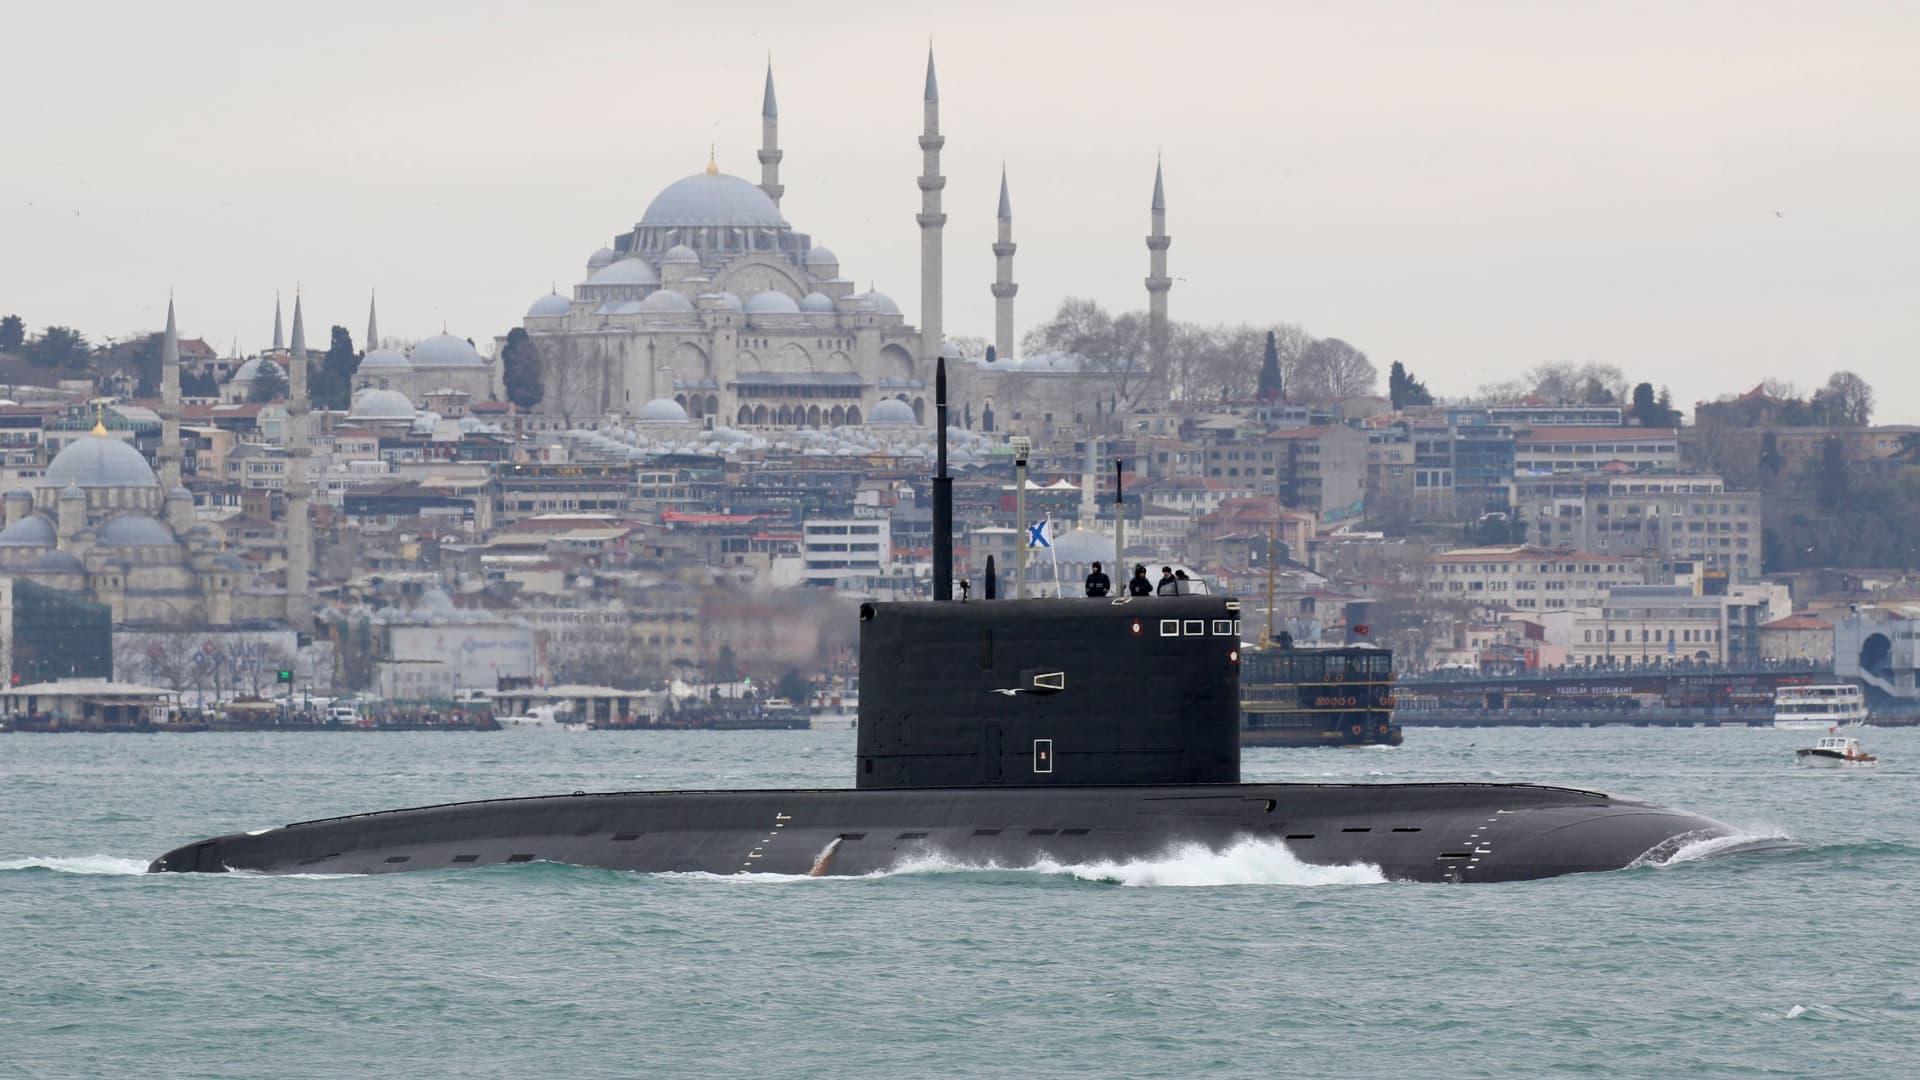 Russian Navy's diesel-electric submarine Rostov-on-Don sails in Bosphorus, on its way to the Black Sea, in Istanbul, Turkey, on February 13, 2022.